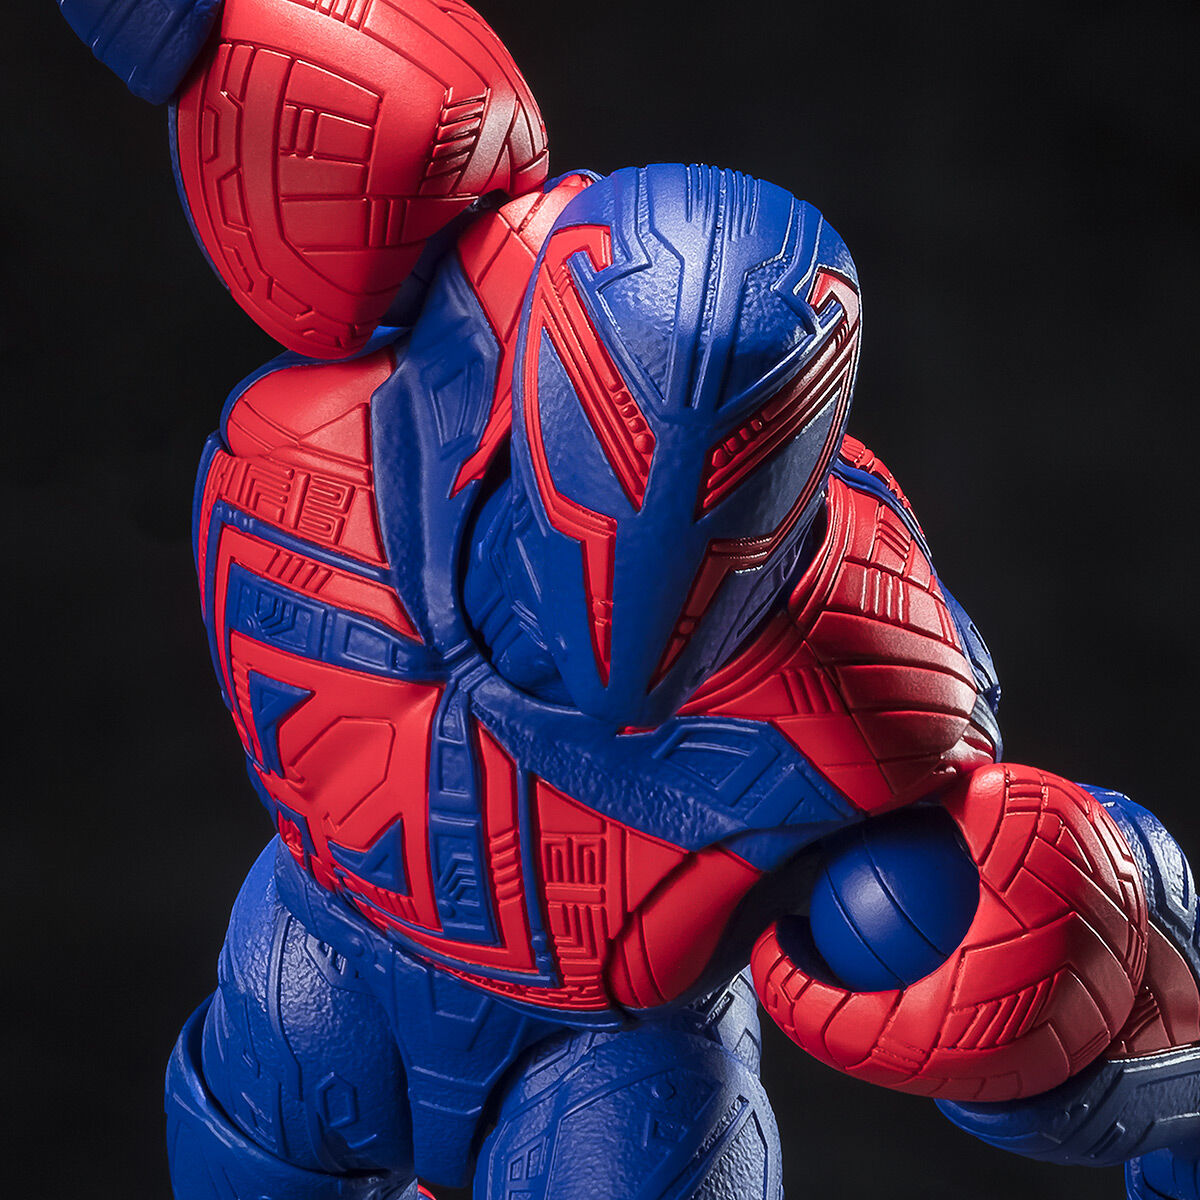 S.H.Figuarts Spider-Man 2099 Across The Spider-Verse 2 Action Figure ...